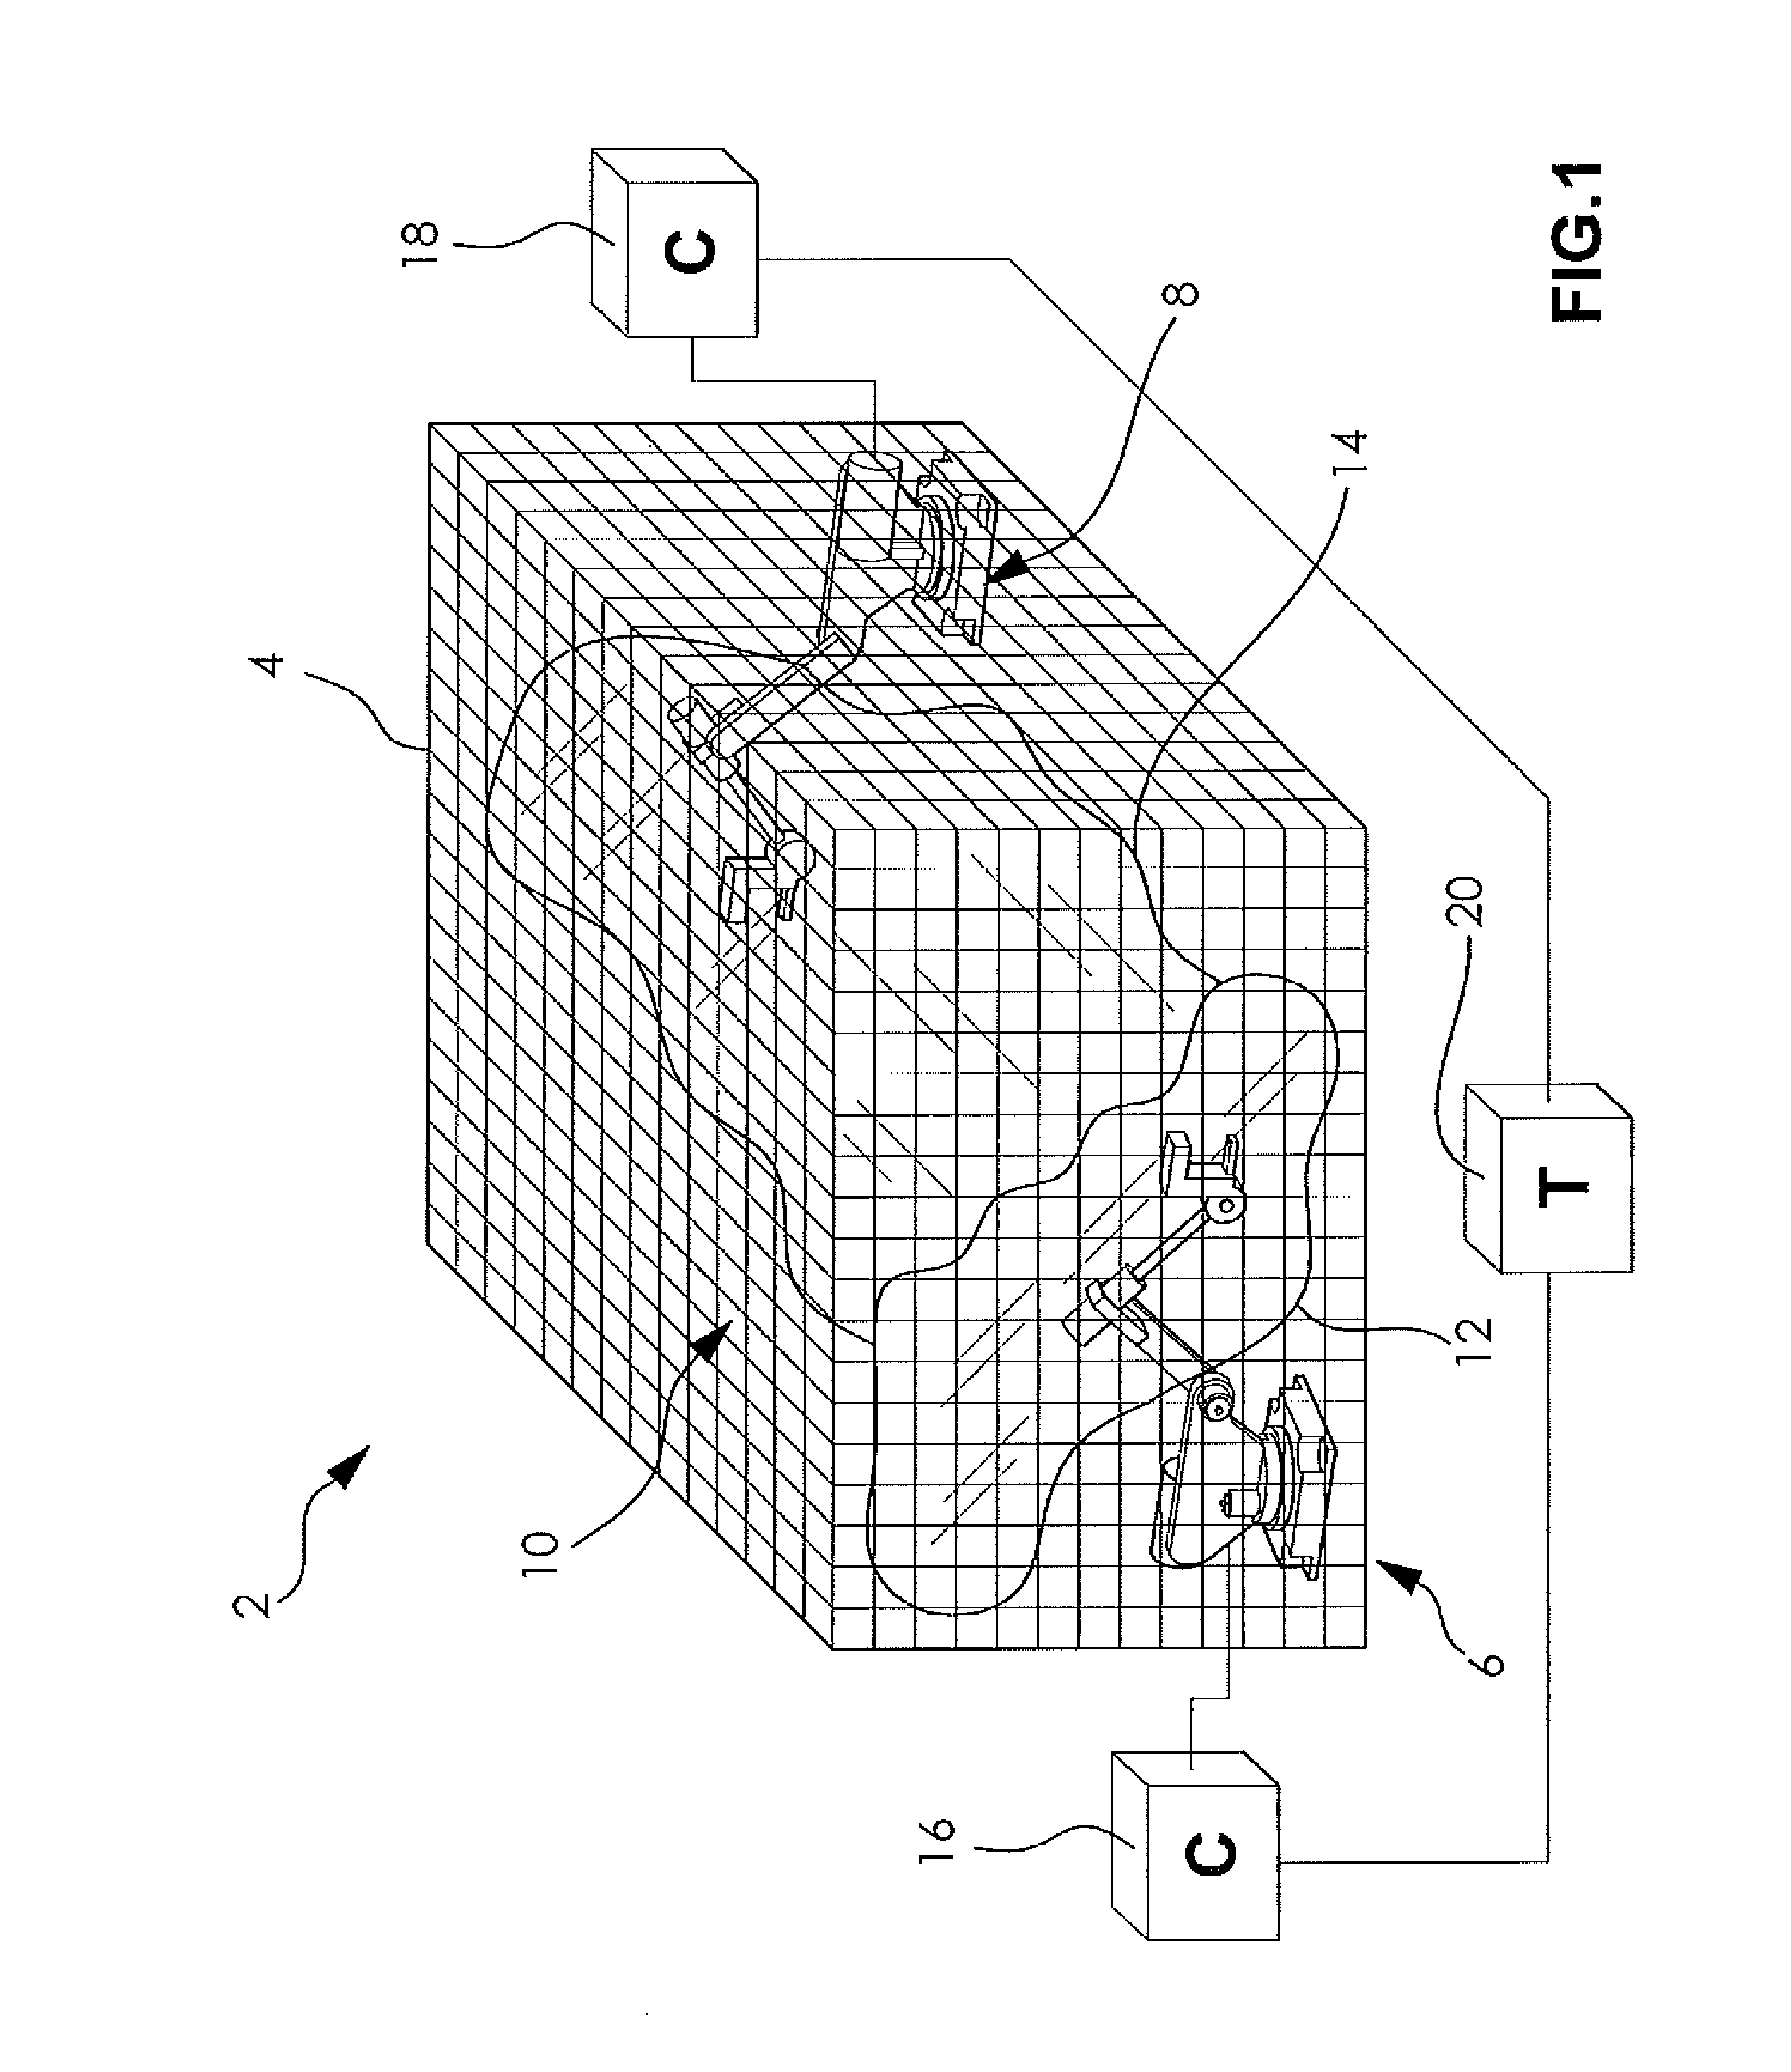 Method and system for automatically preventing deadlock in multi-robot systems